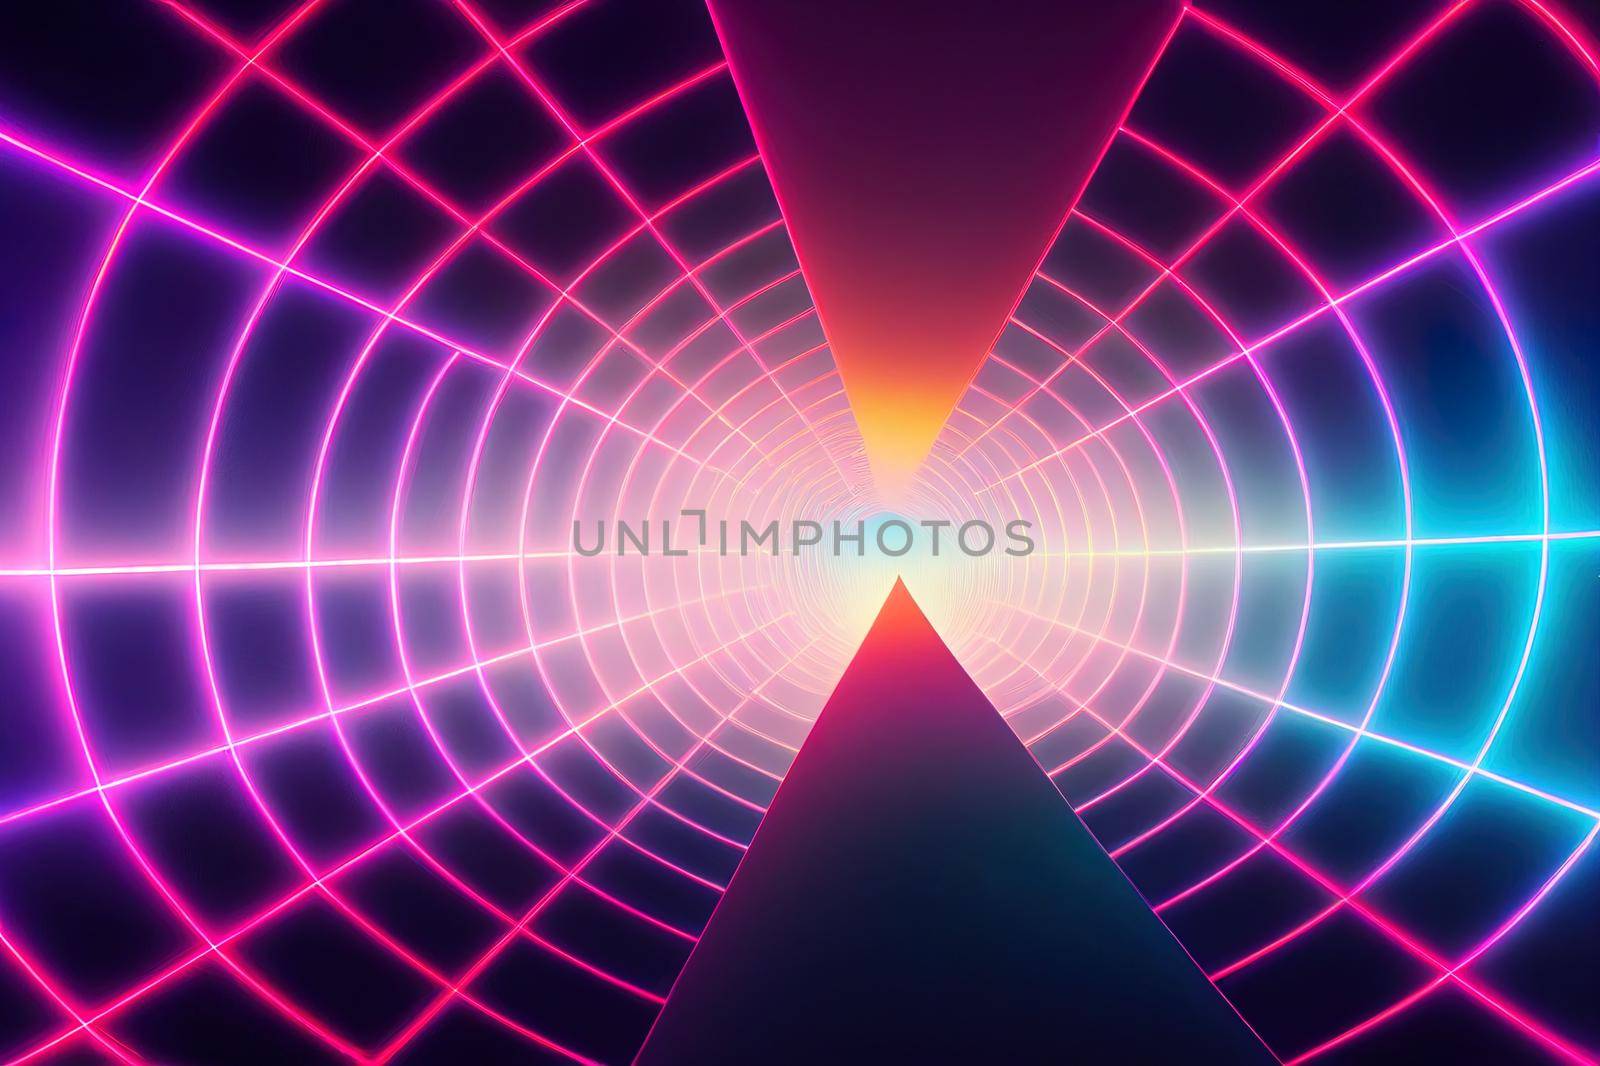 3d render, glowing lines, tunnel, neon lights, virtual reality, abstract background, square portal, arch, pink blue spectrum vibrant colors, laser show